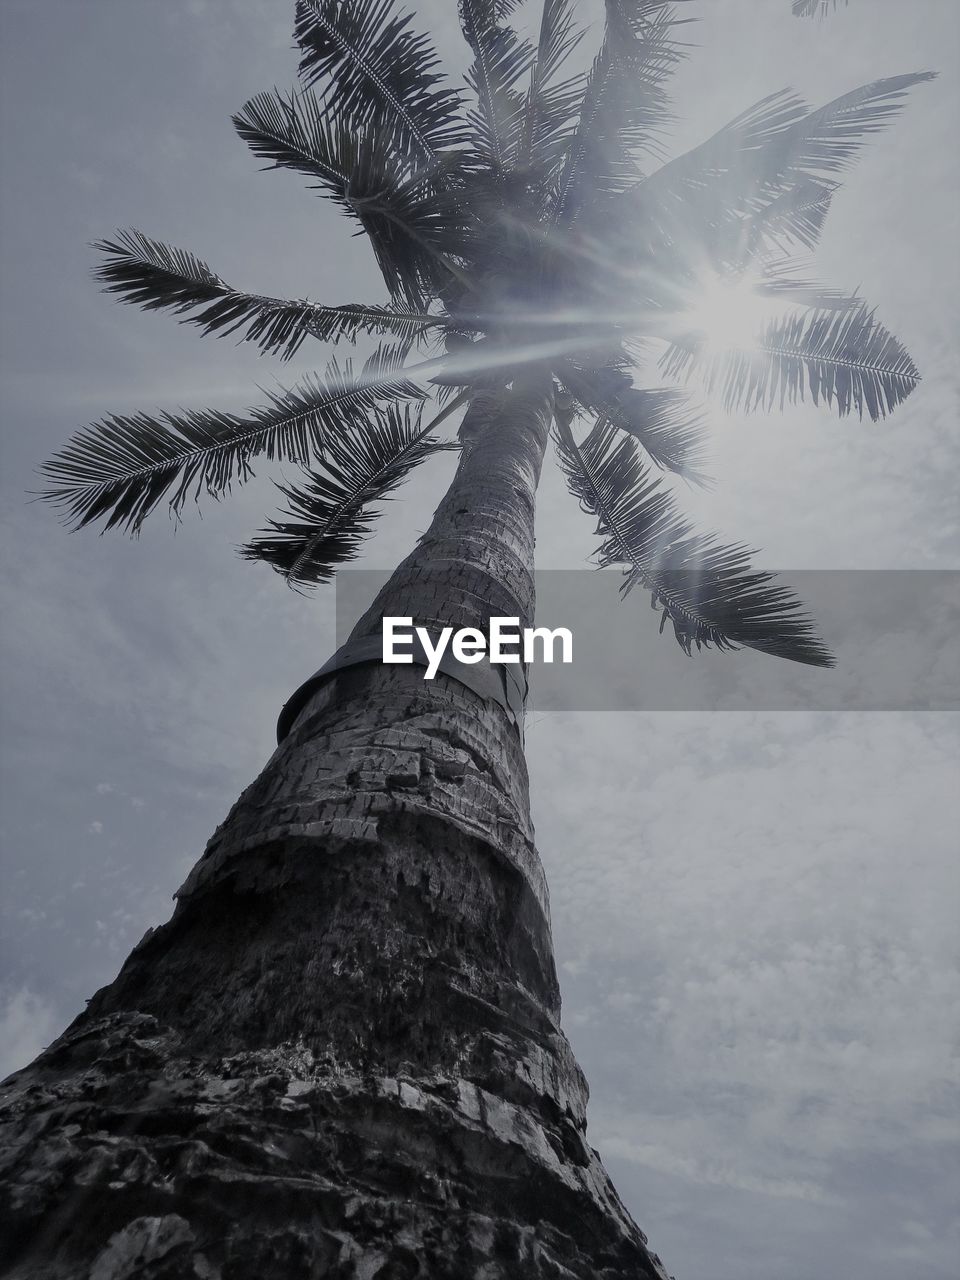 LOW ANGLE VIEW OF PALM TREE AGAINST CLOUDS